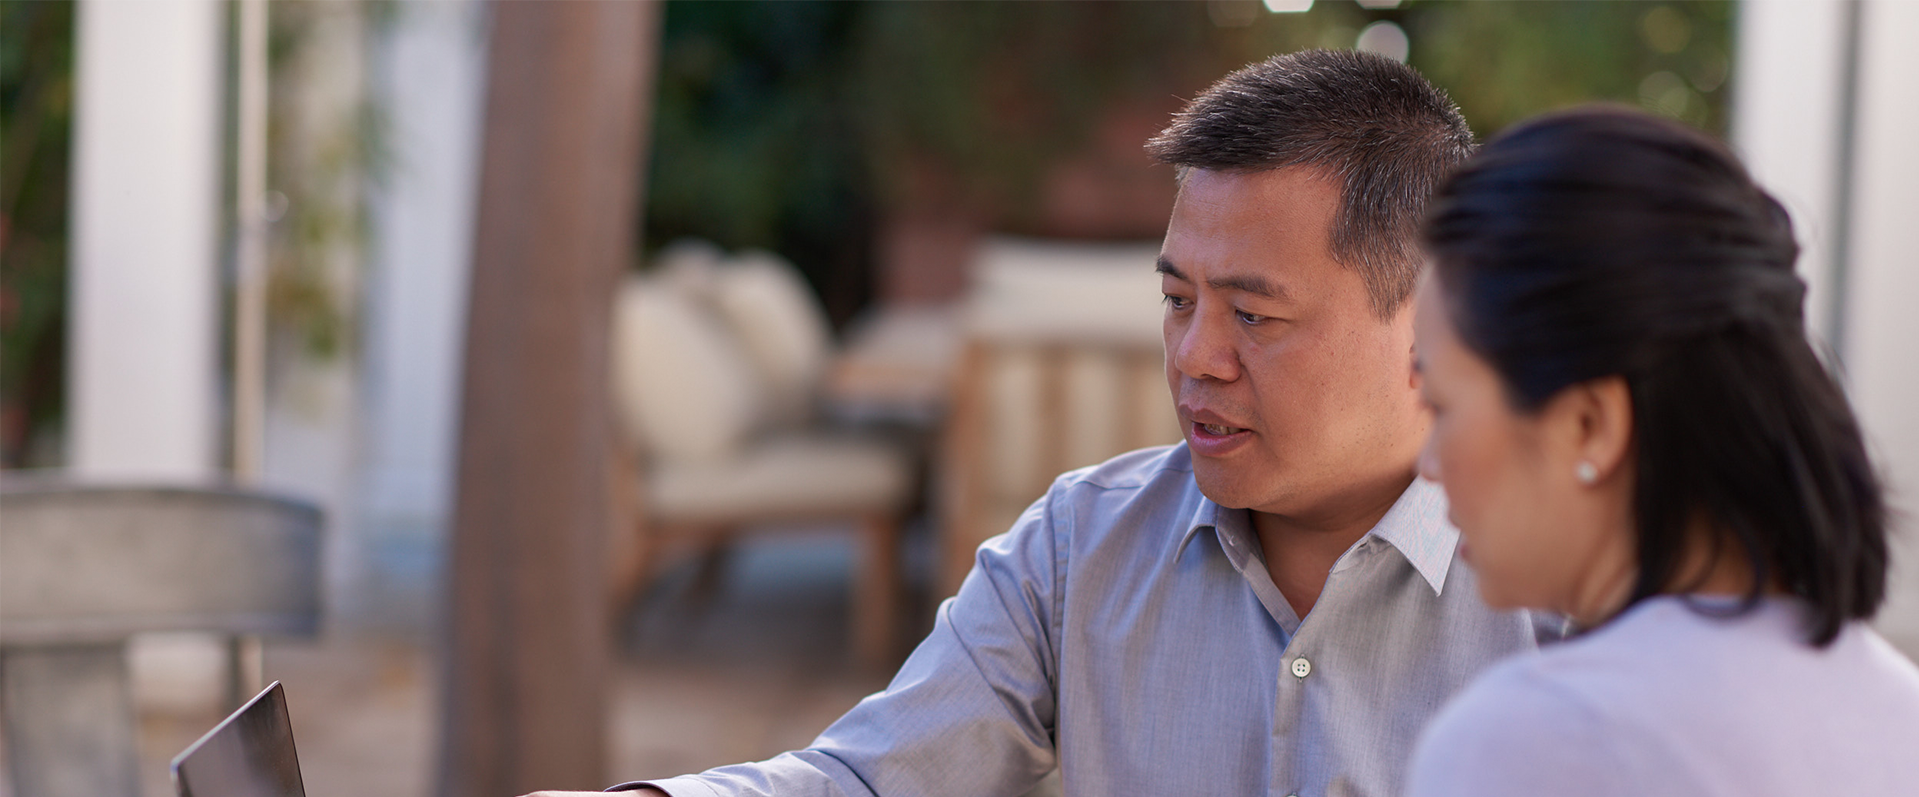 Tianqiao Chen, at the Frontier of Supporting Fundamental Research through Philanthropy